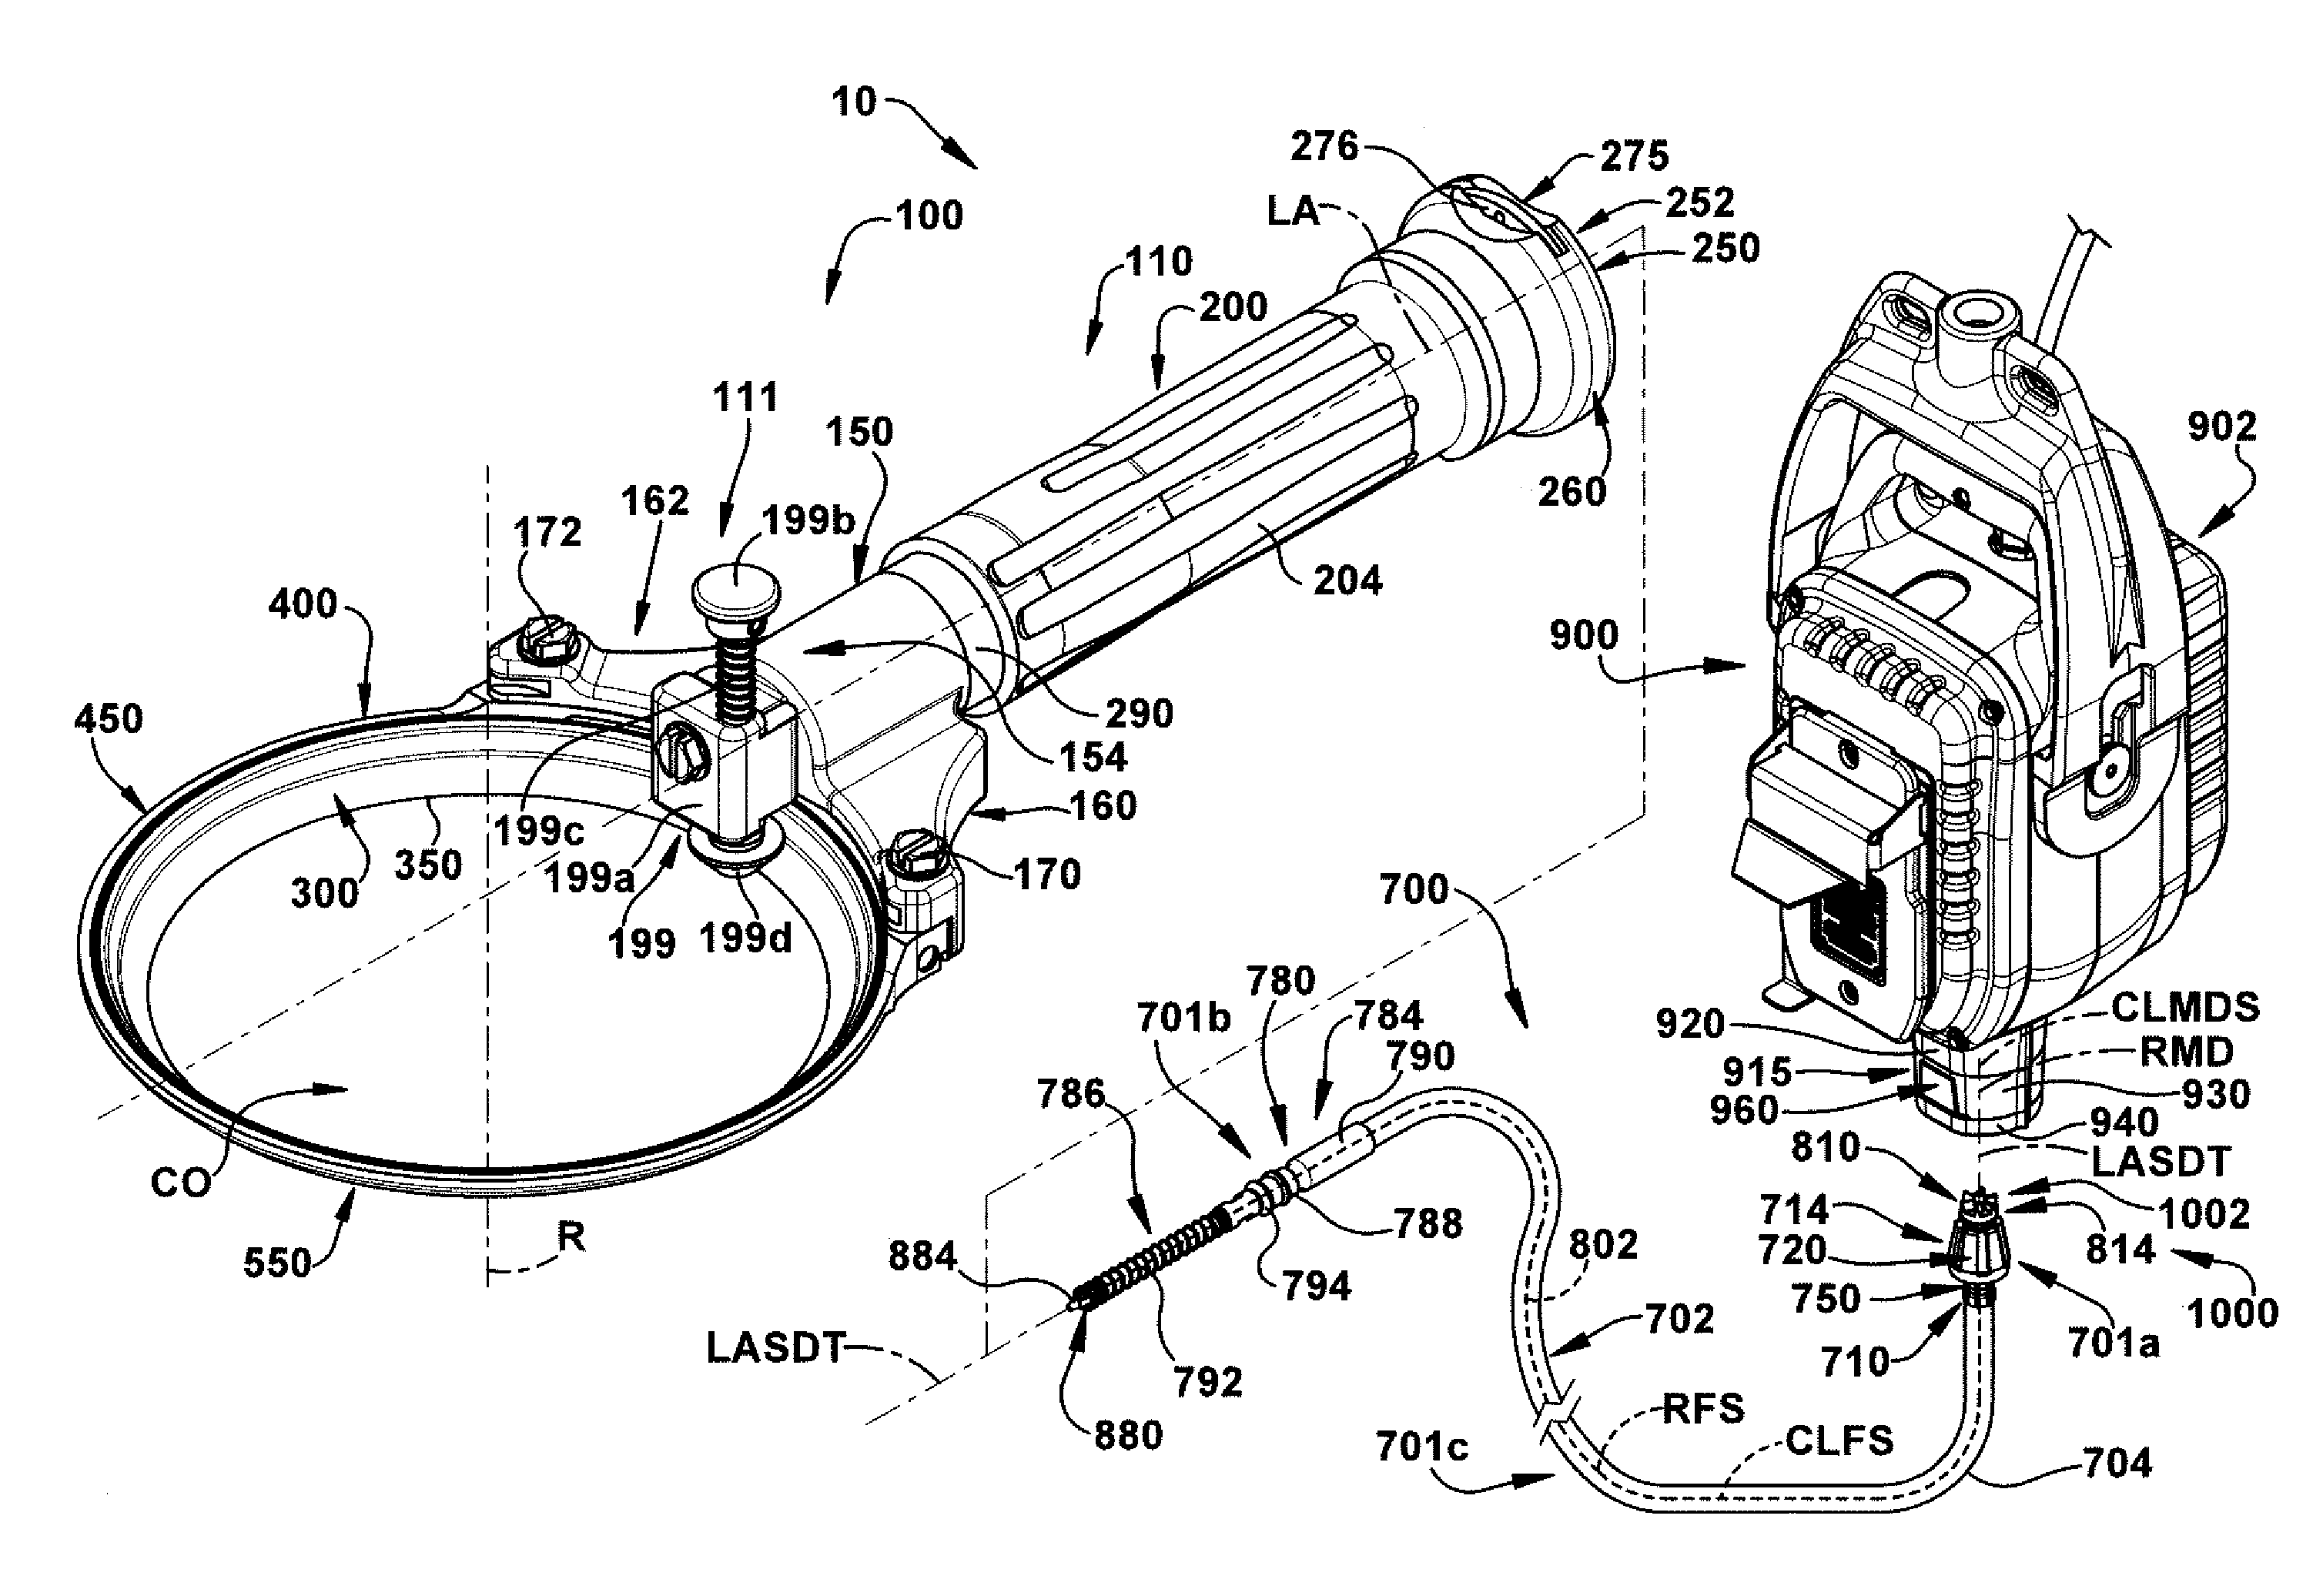 Flex Shaft With Crimped Lock Sleeve For Power Operated Rotary Knife